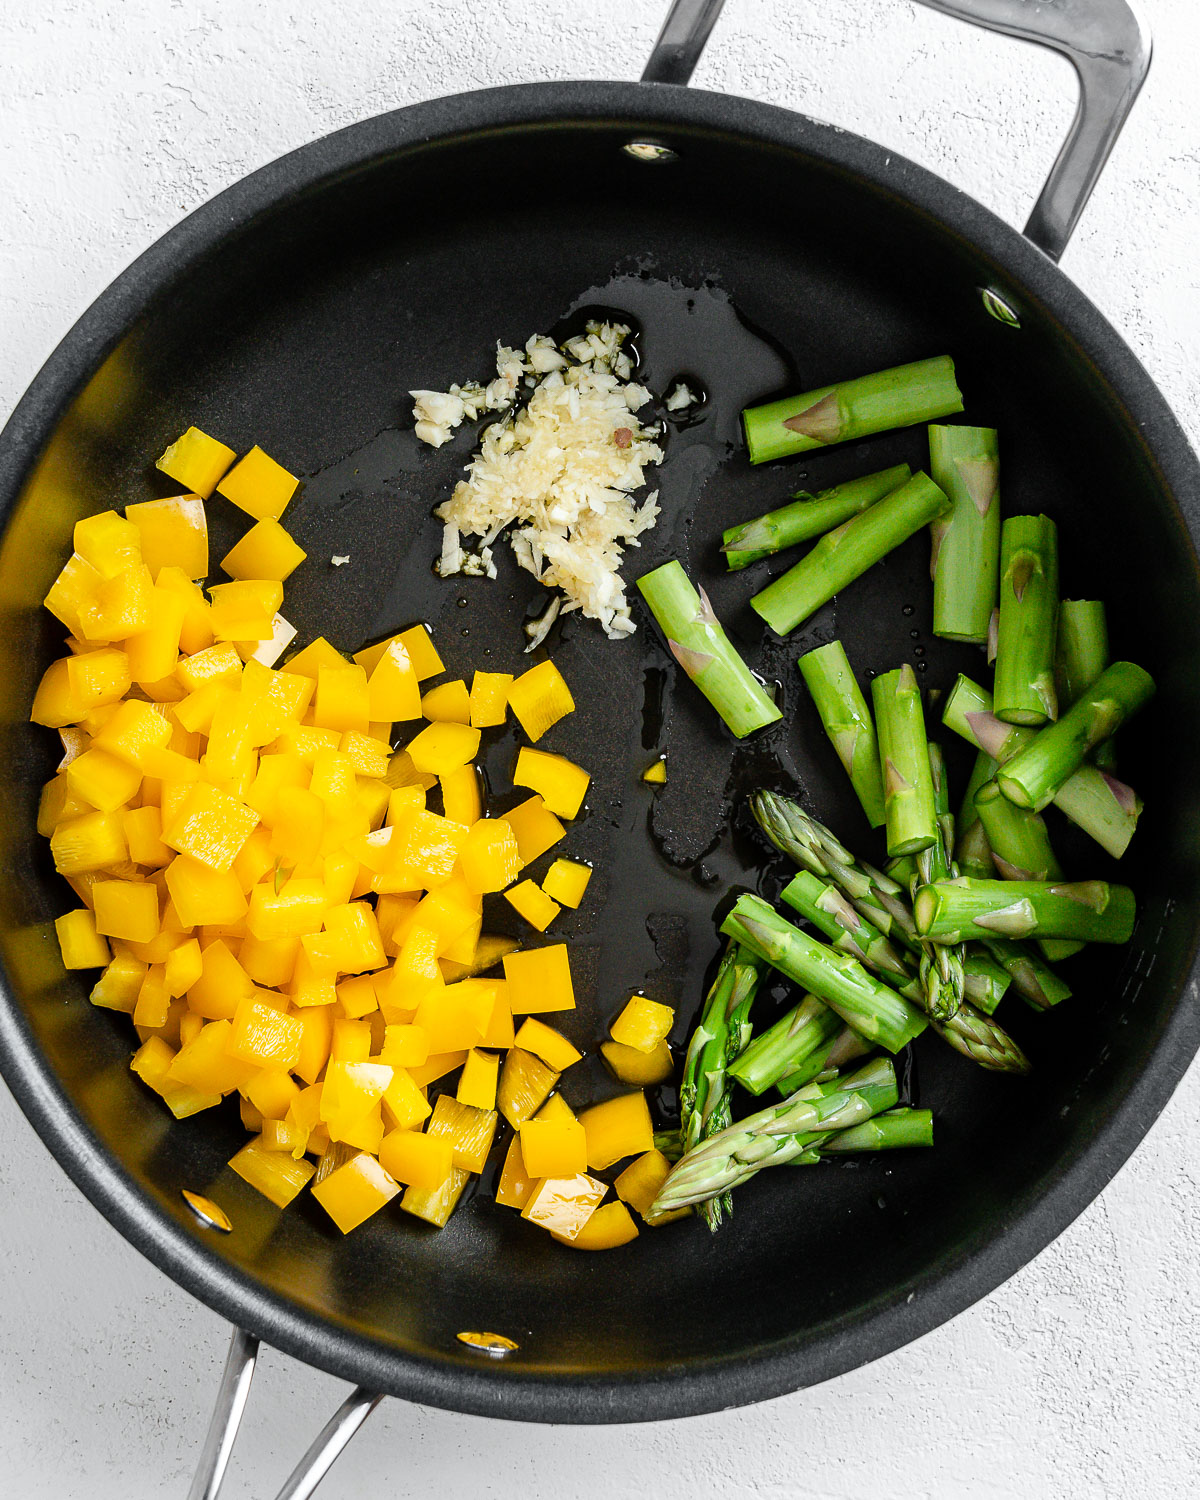 the addition of veggies and spices into black pan